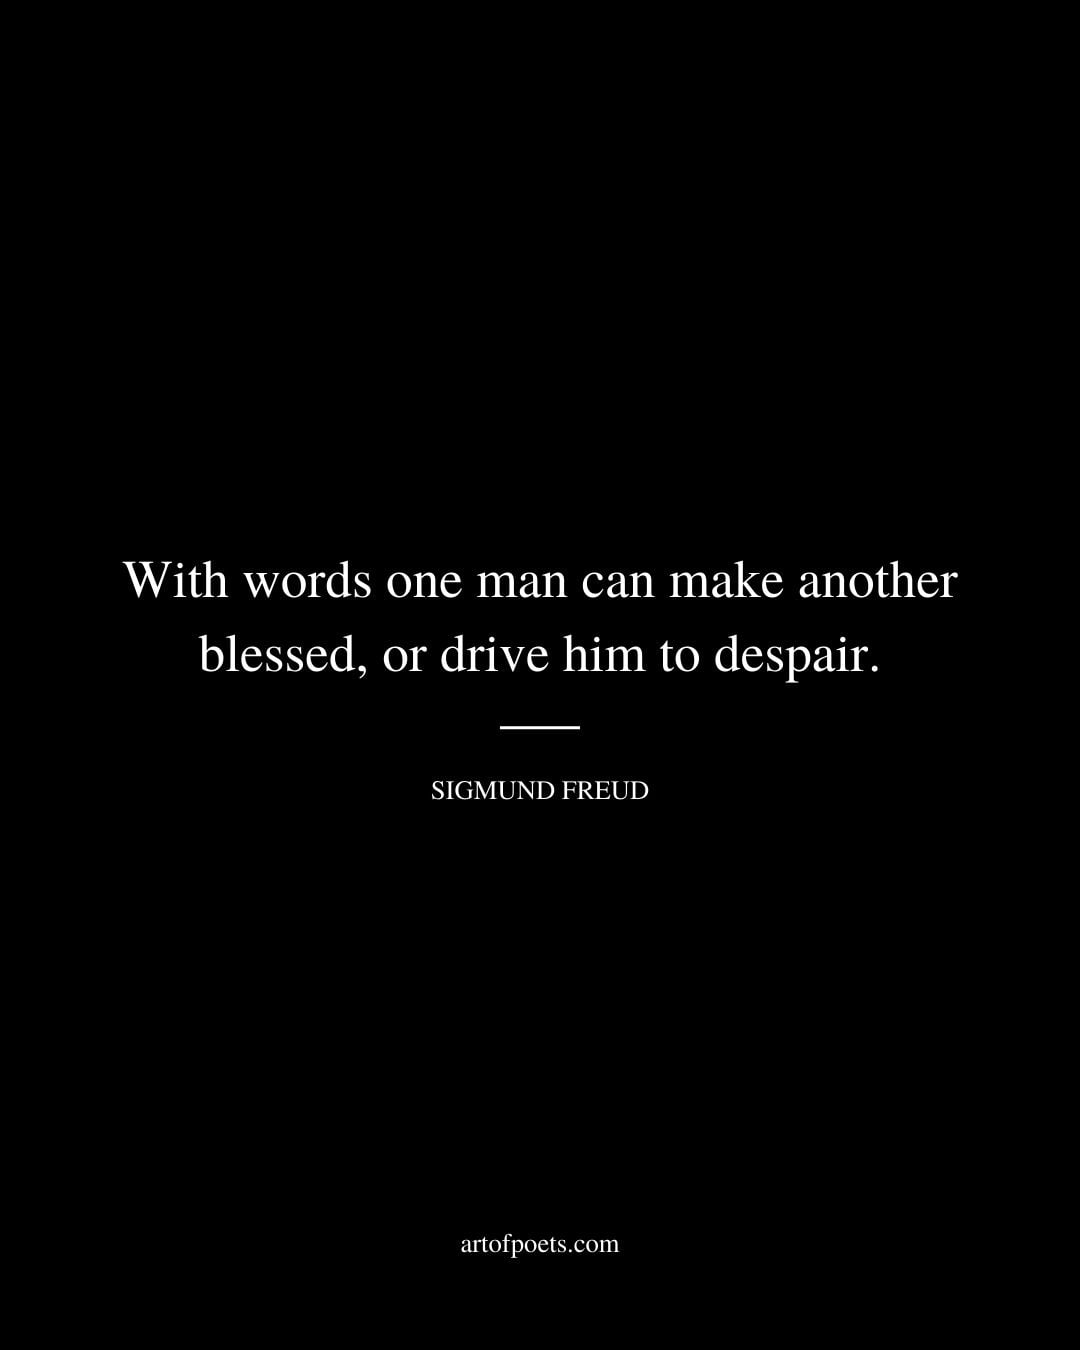 With words one man can make another blessed or drive him to despair